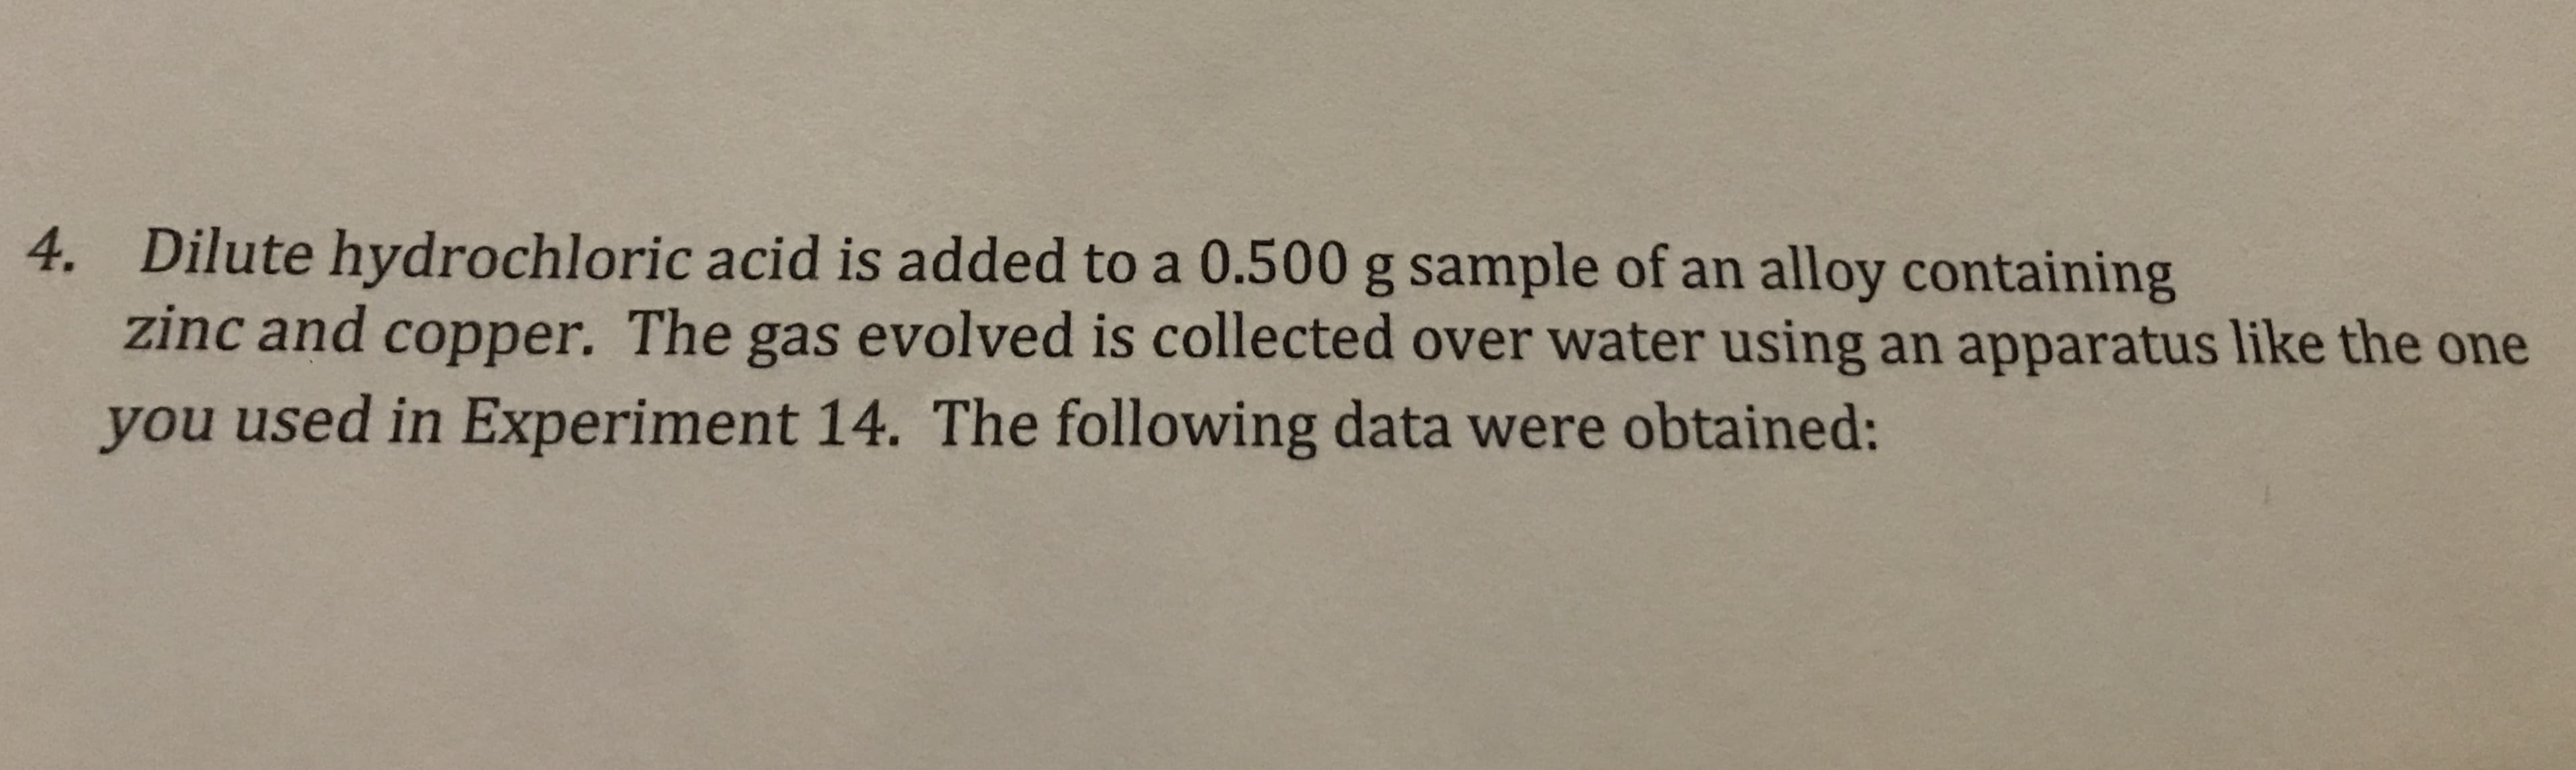 4. Dilute hydrochloric acid is added to a 0.500 g sample of an alloy containing
zinc and copper. The gas evolved is collected over water using an apparatus like the one
you used in Experiment 14. The following data were obtained:
